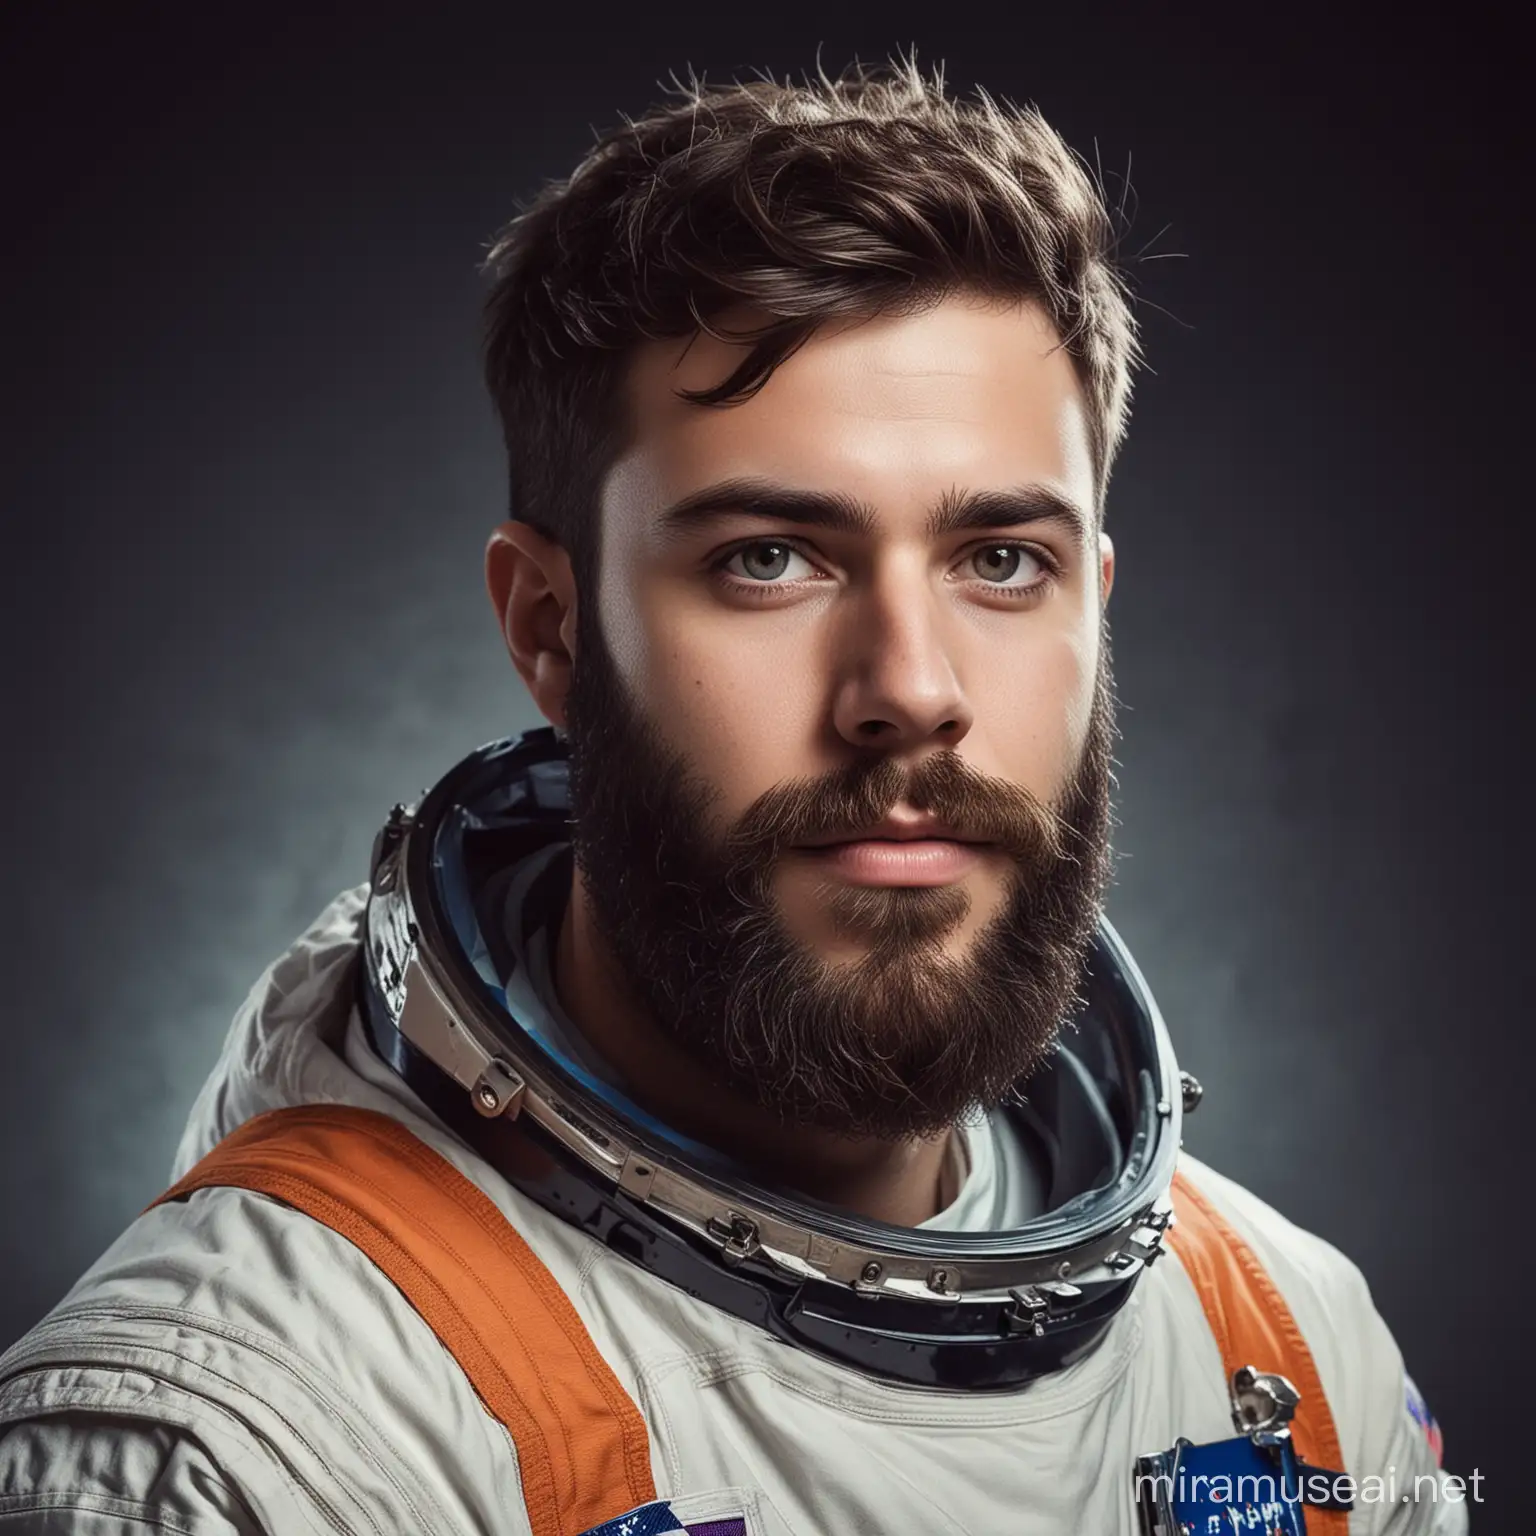 young astronaut with beard